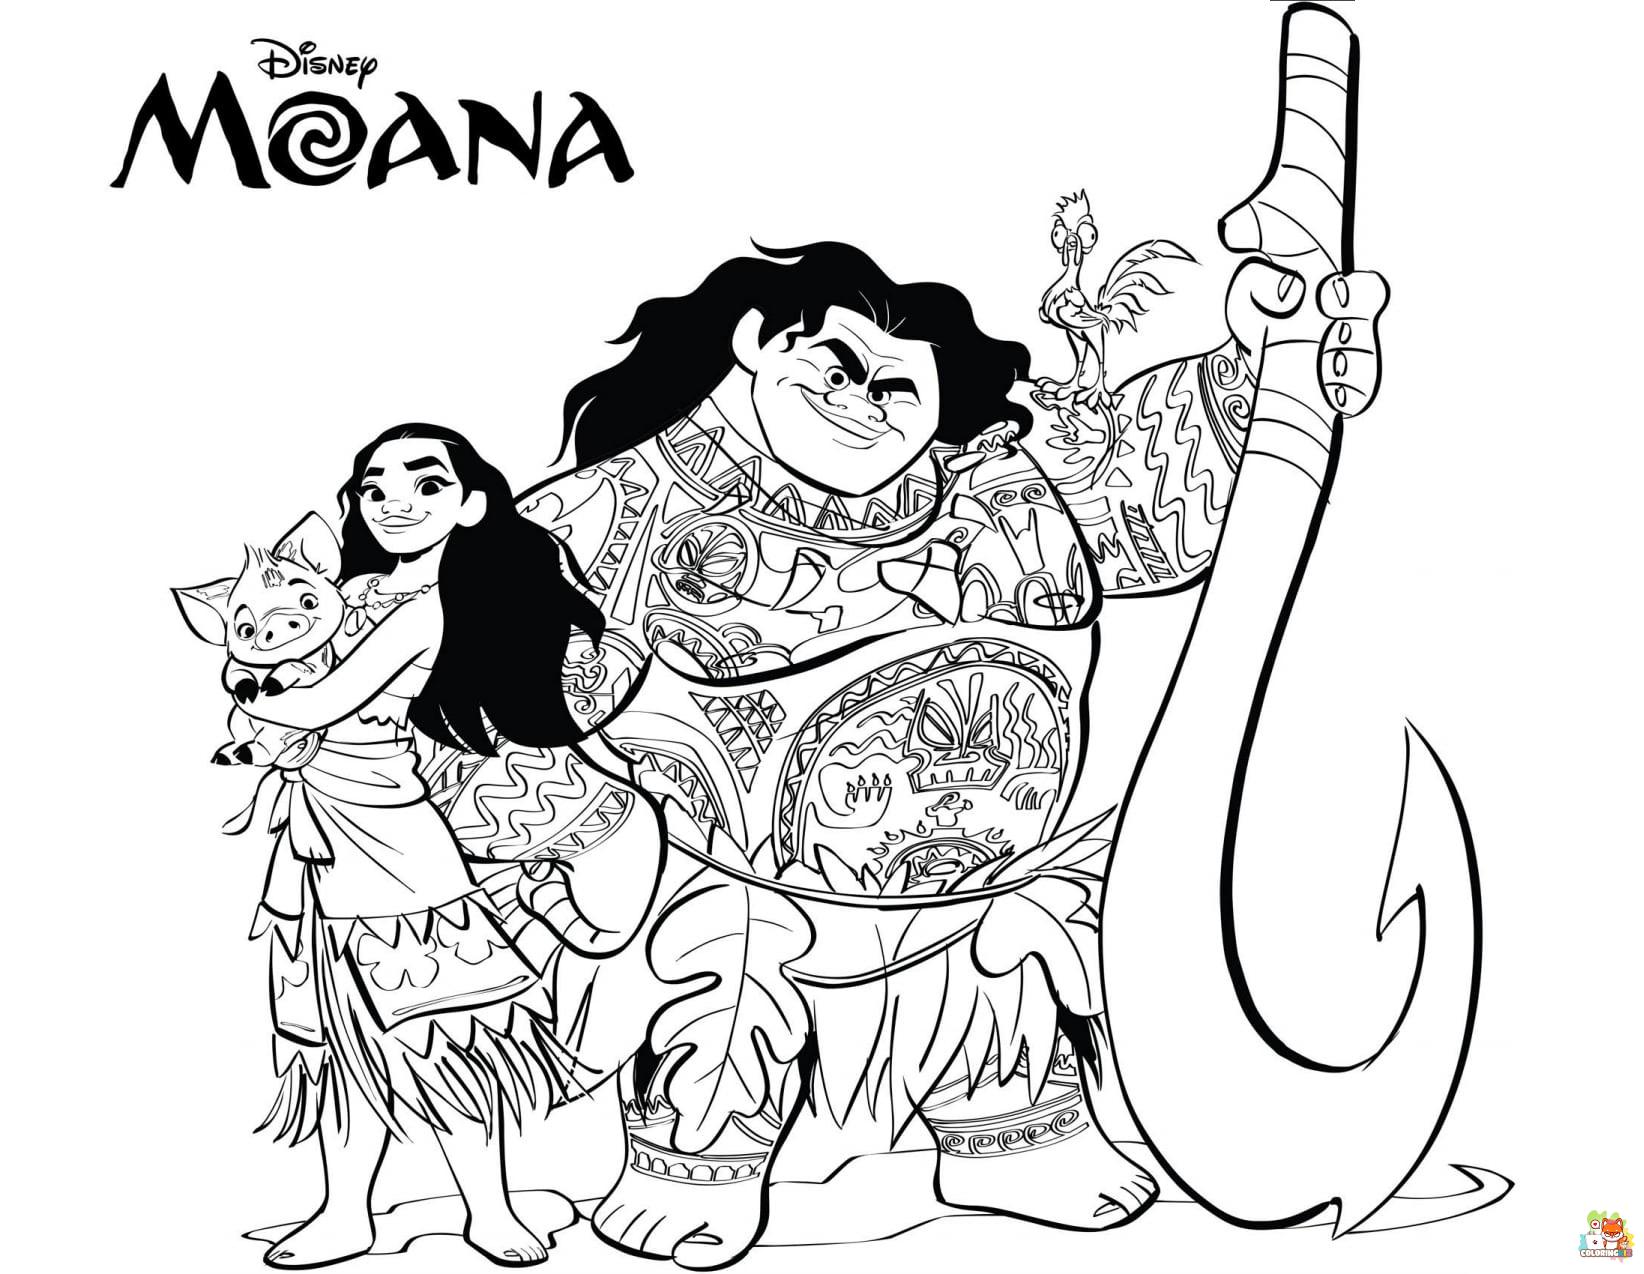 Moana and Family Coloring Pages 1